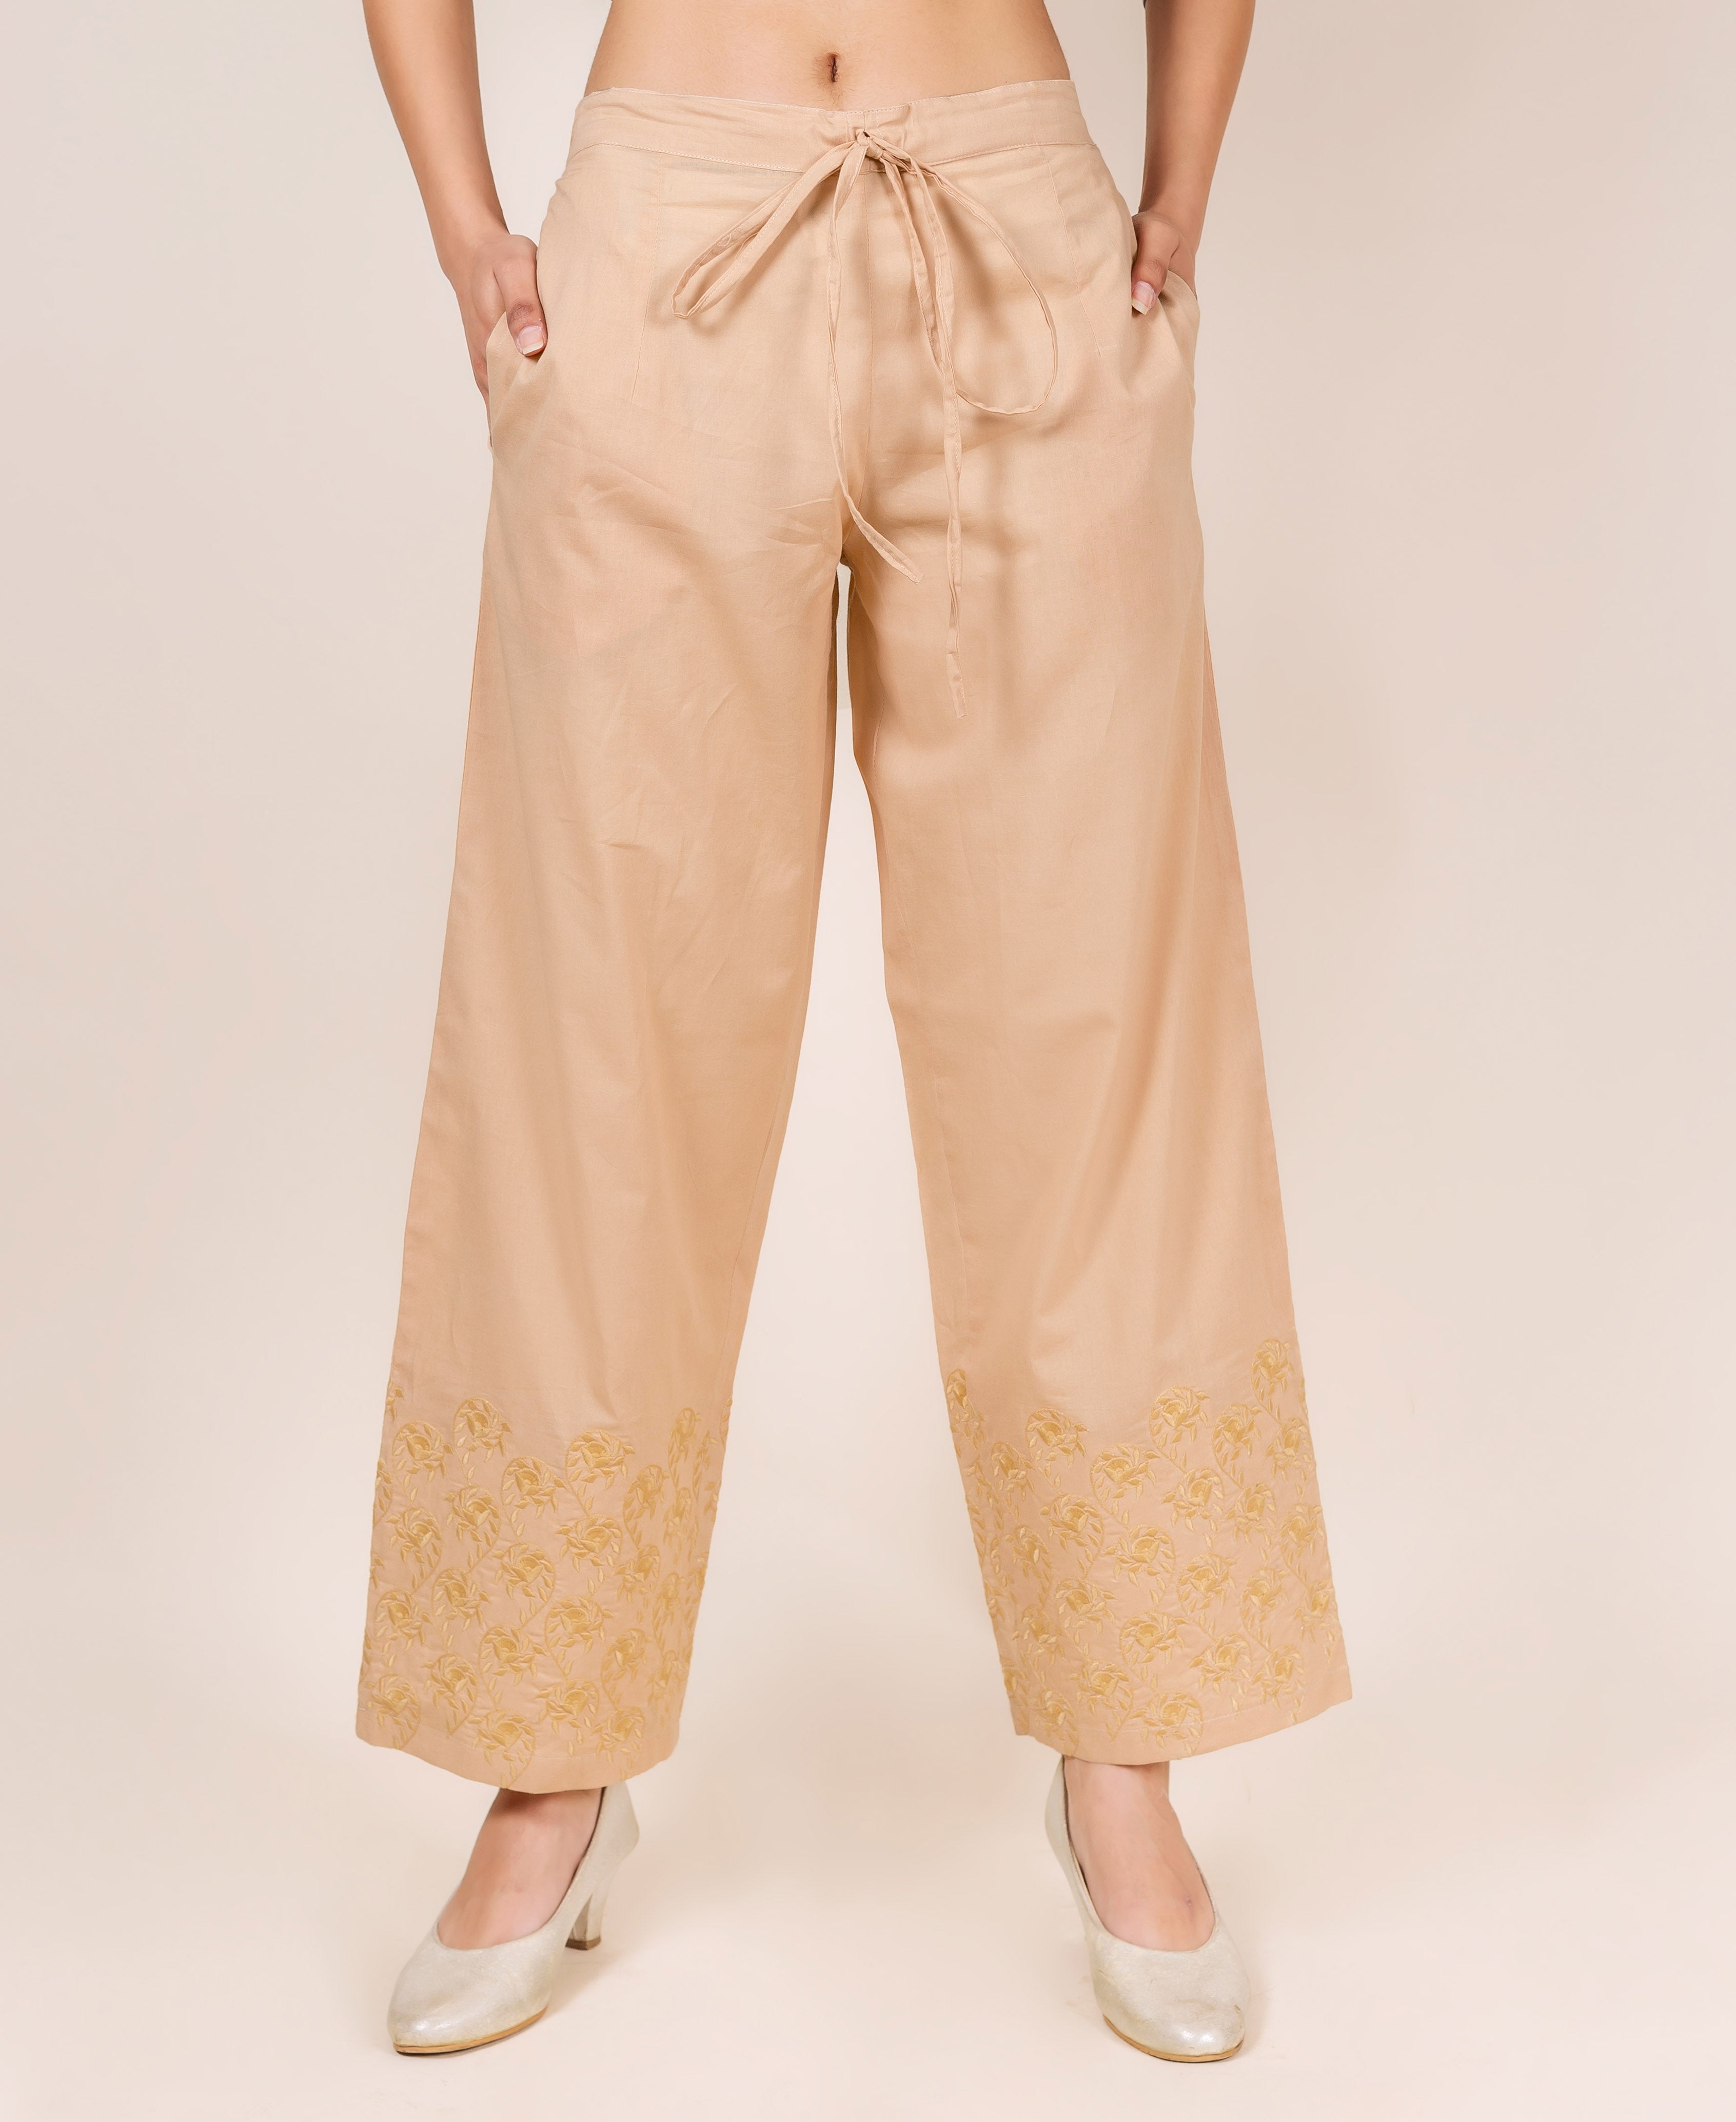 Free Photo | Asian woman in white palazzo pants with design space casual  wear fashion full body